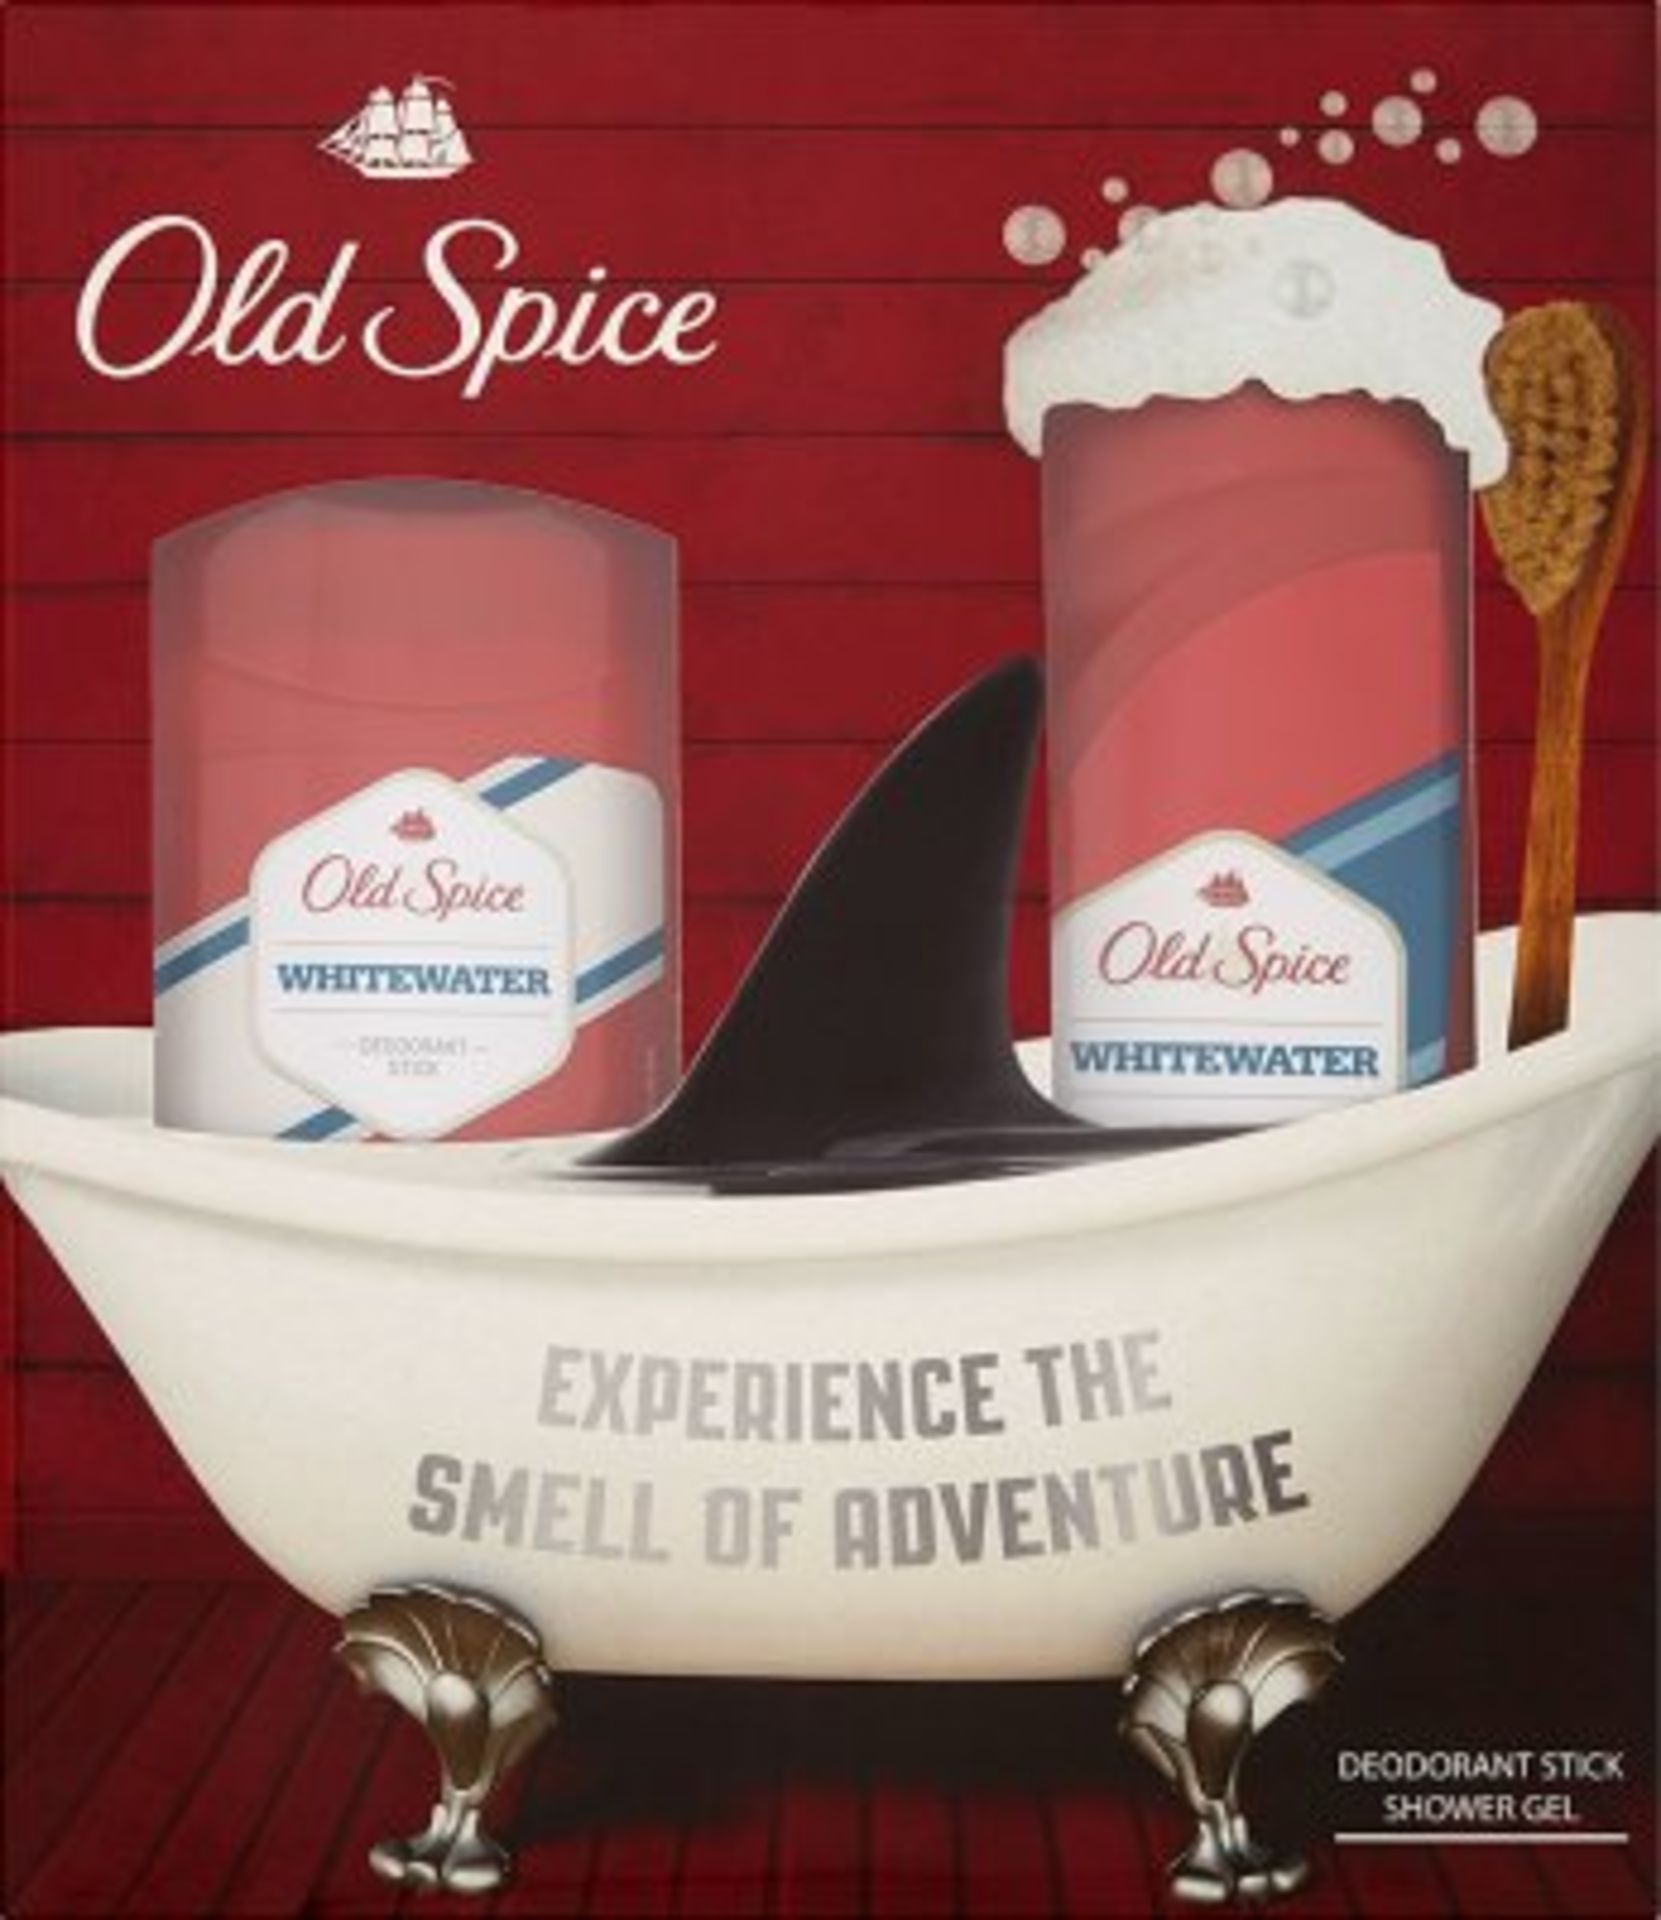 V *TRADE QTY* Brand New Old Spice Whitewater Deodorant Stick And Shower Gel ISP £7.99 (ebay) X 4